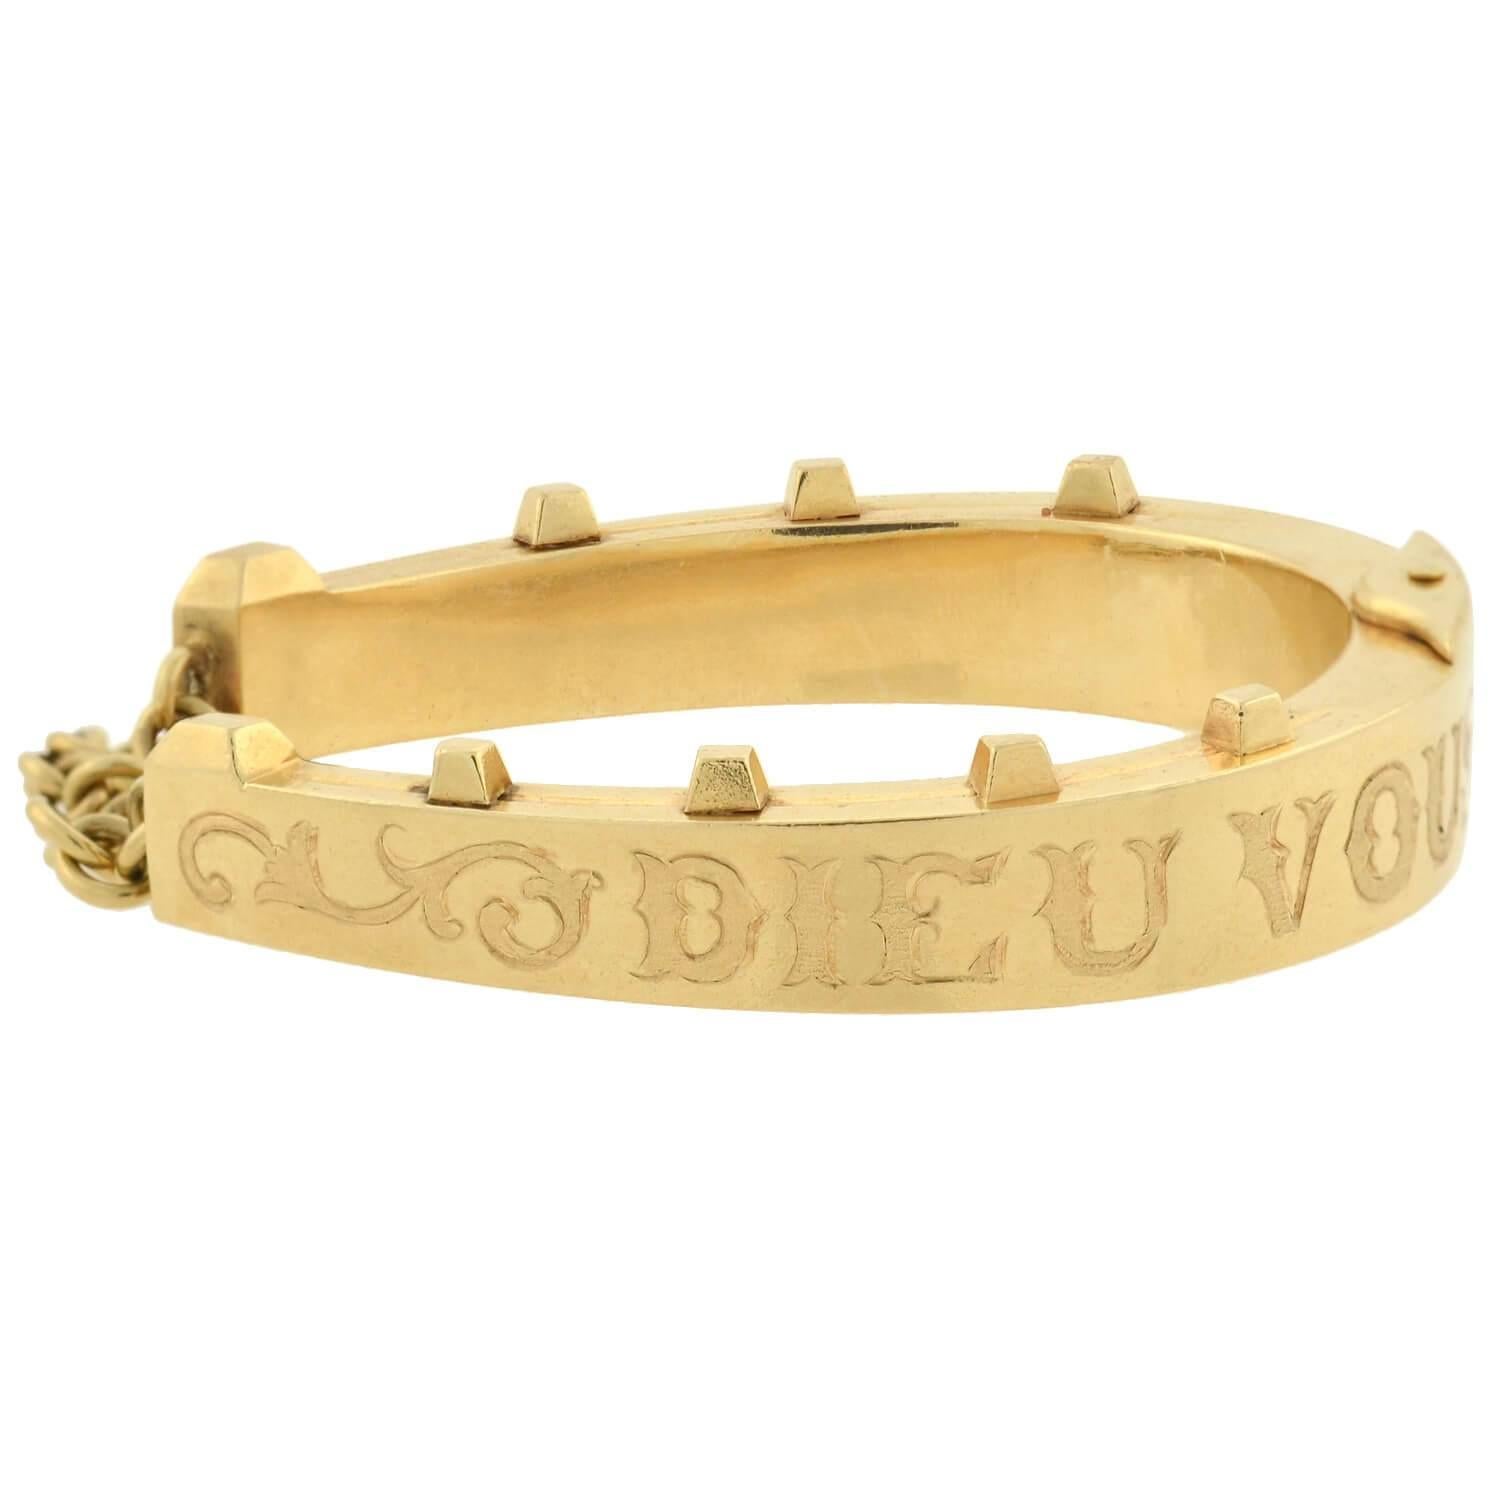 A stunning horseshoe bracelet from the Victorian (ca1880) era! Crafted in 14kt yellow gold, this hinged bangle forms the shape of a large horseshoe that wraps comfortably around the wrist. Seven raised 